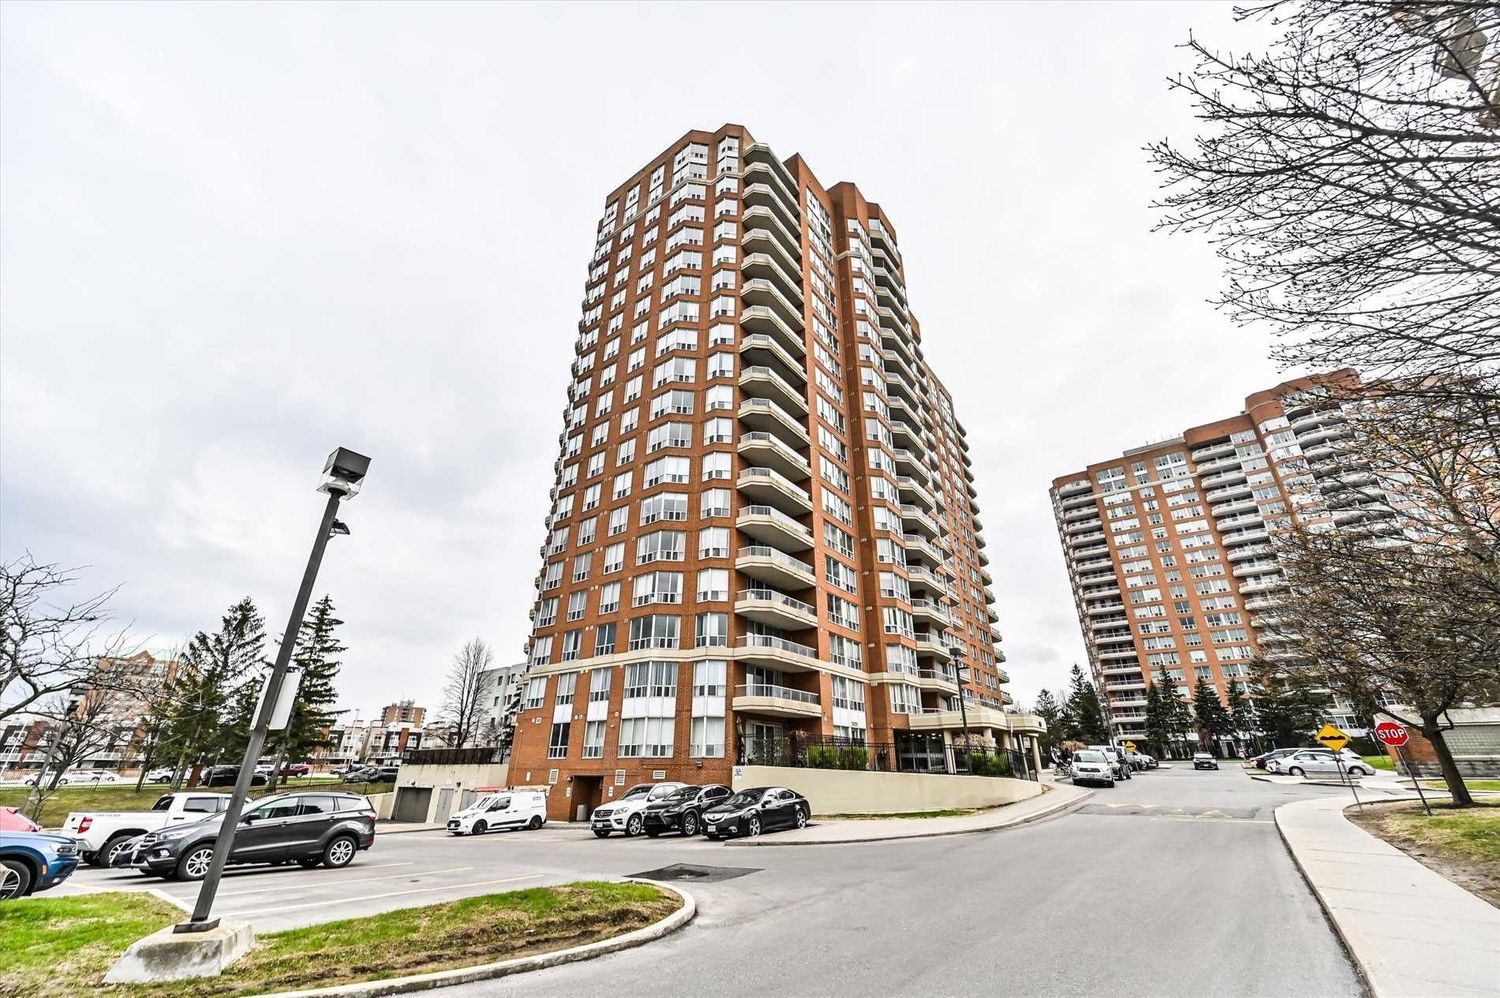 410 Mclevin Avenue. Mayfair on the Green II Condos is located in  Scarborough, Toronto - image #1 of 3